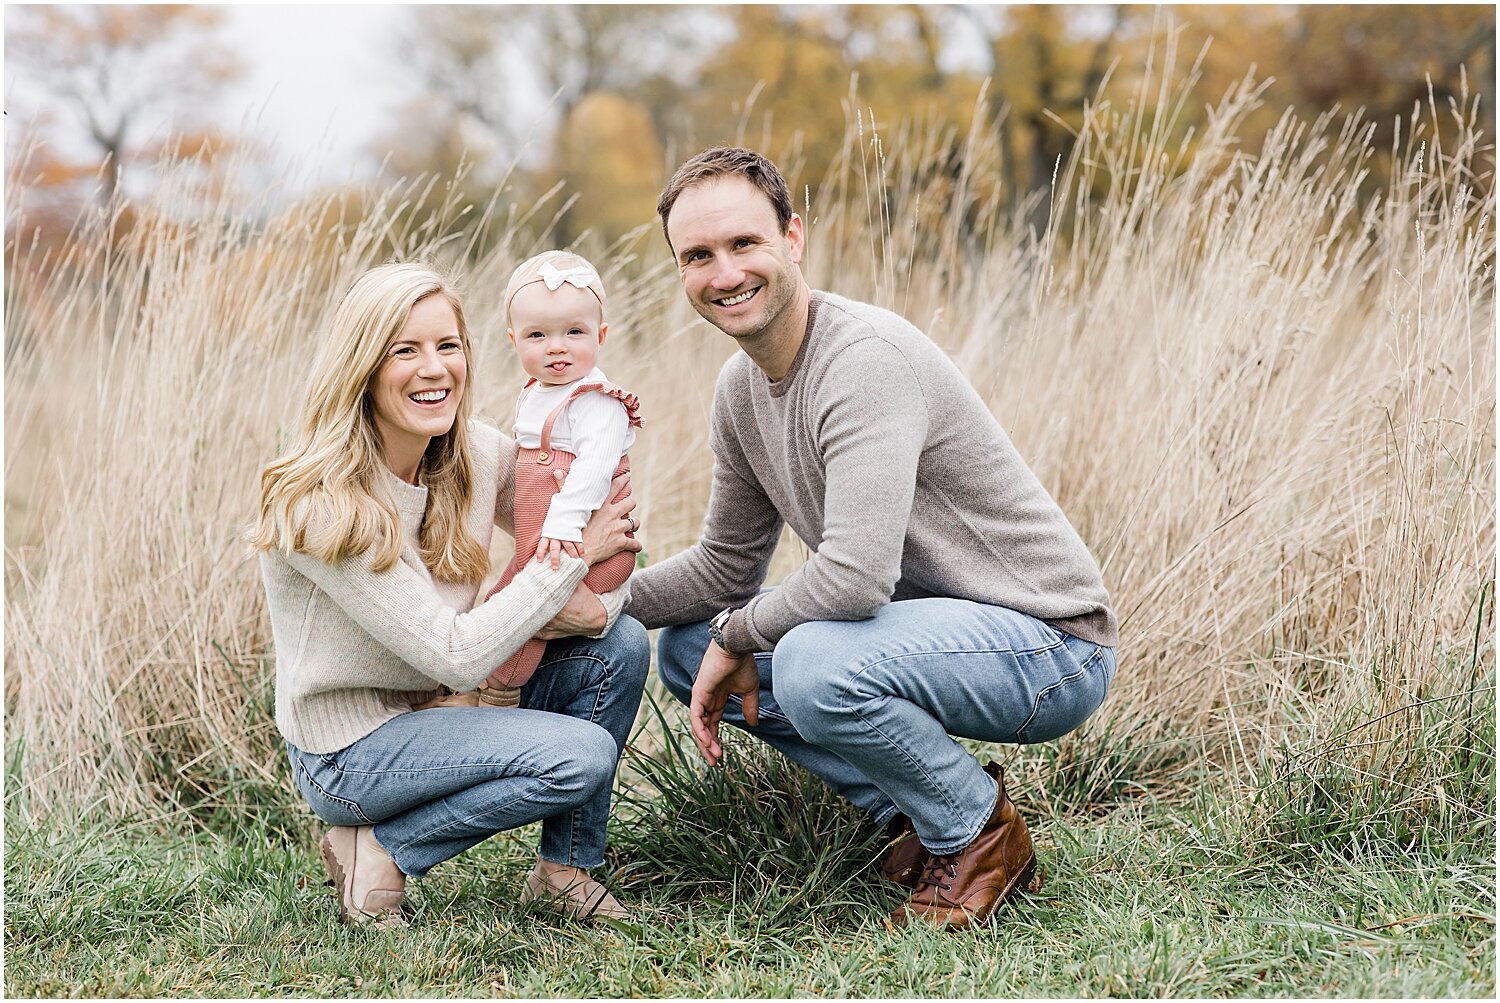 Family session to celebrate baby girl's first birthday at Waveny Park with New Canaan Family Photographer, Kristin Wood Photography.